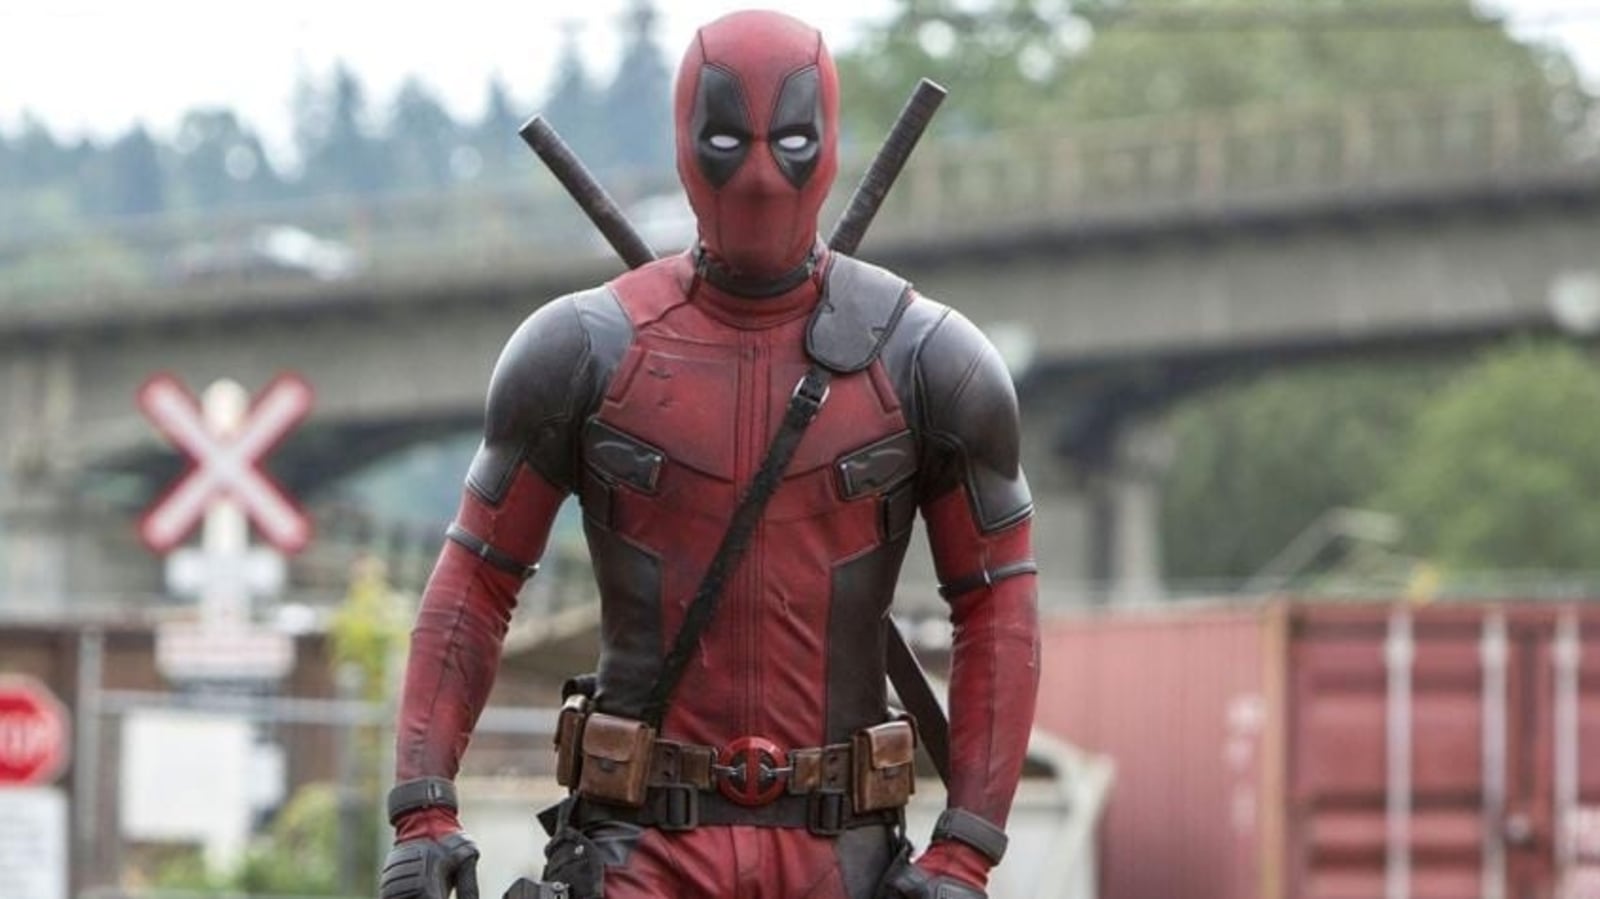 Scriptwriter says Deadpool 3 will 'absolutely' be rated R